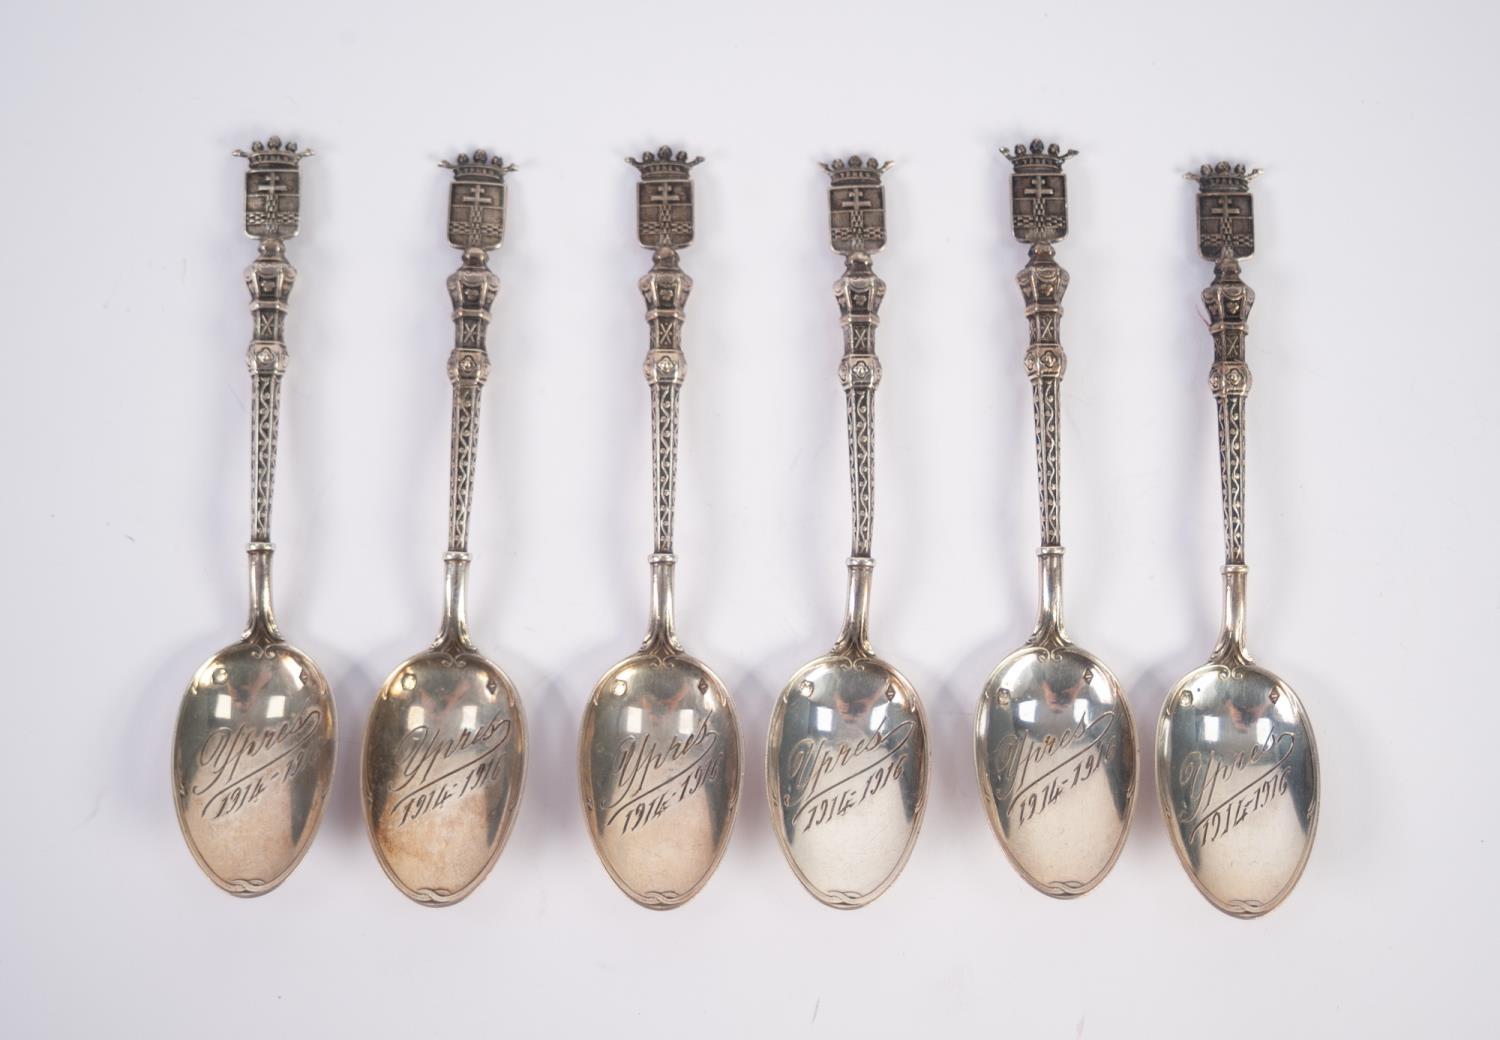 SET OF SIX FRENCH EARLY 20th CENTURY GOTHIC PATTERN SILVER COFFEE SPOONS, with town crest finial, - Image 2 of 2